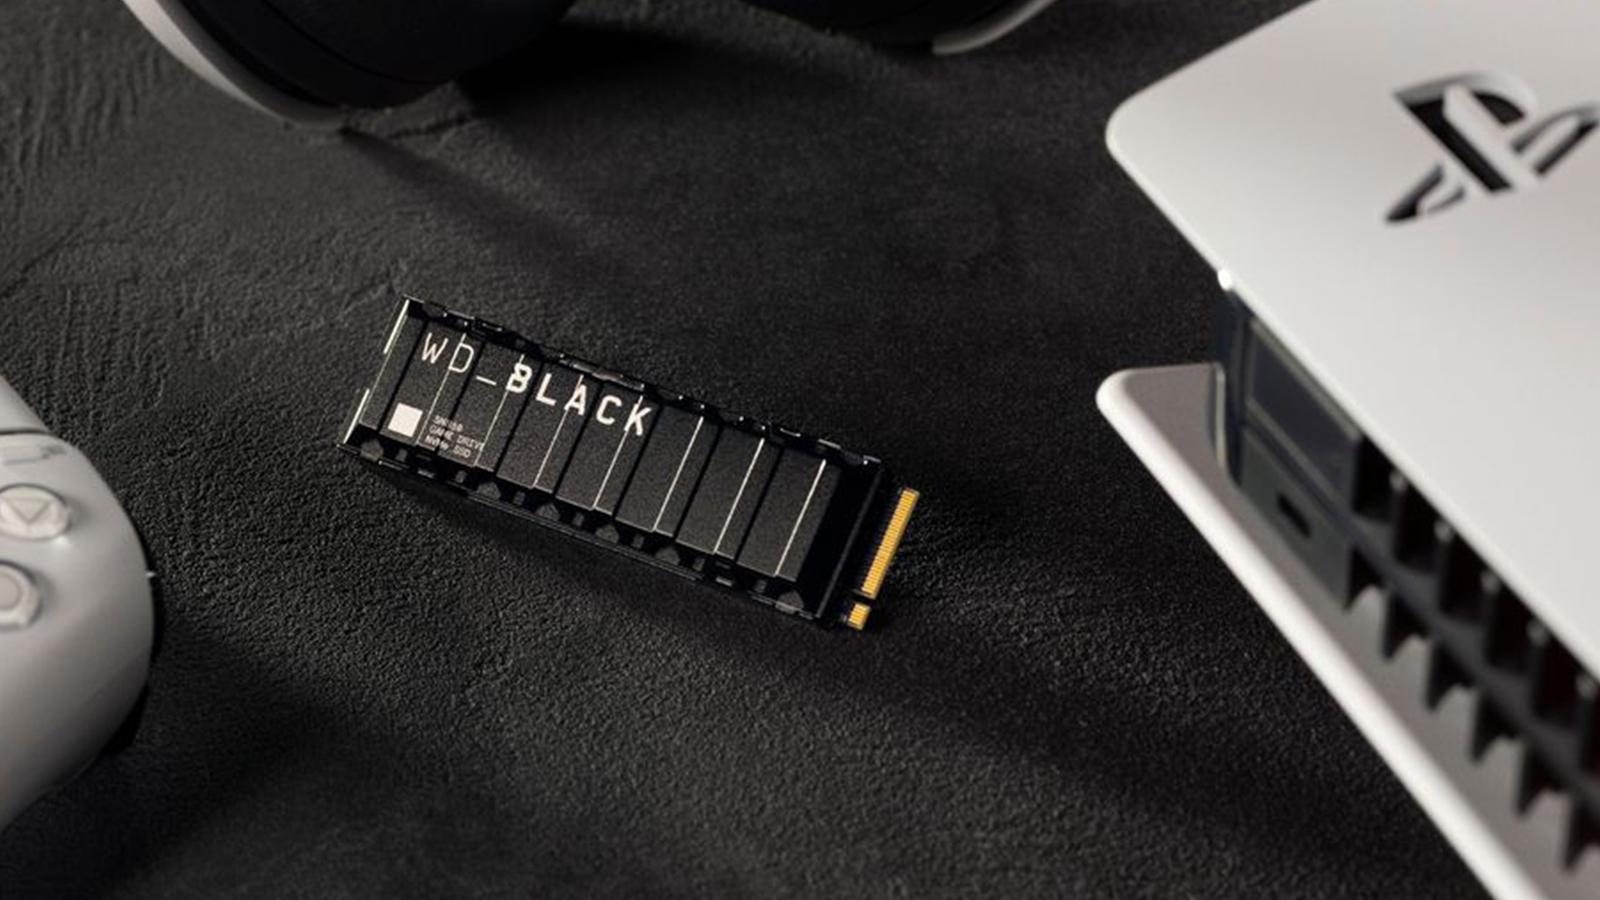 This 1TB SSD is really cheap on Amazon